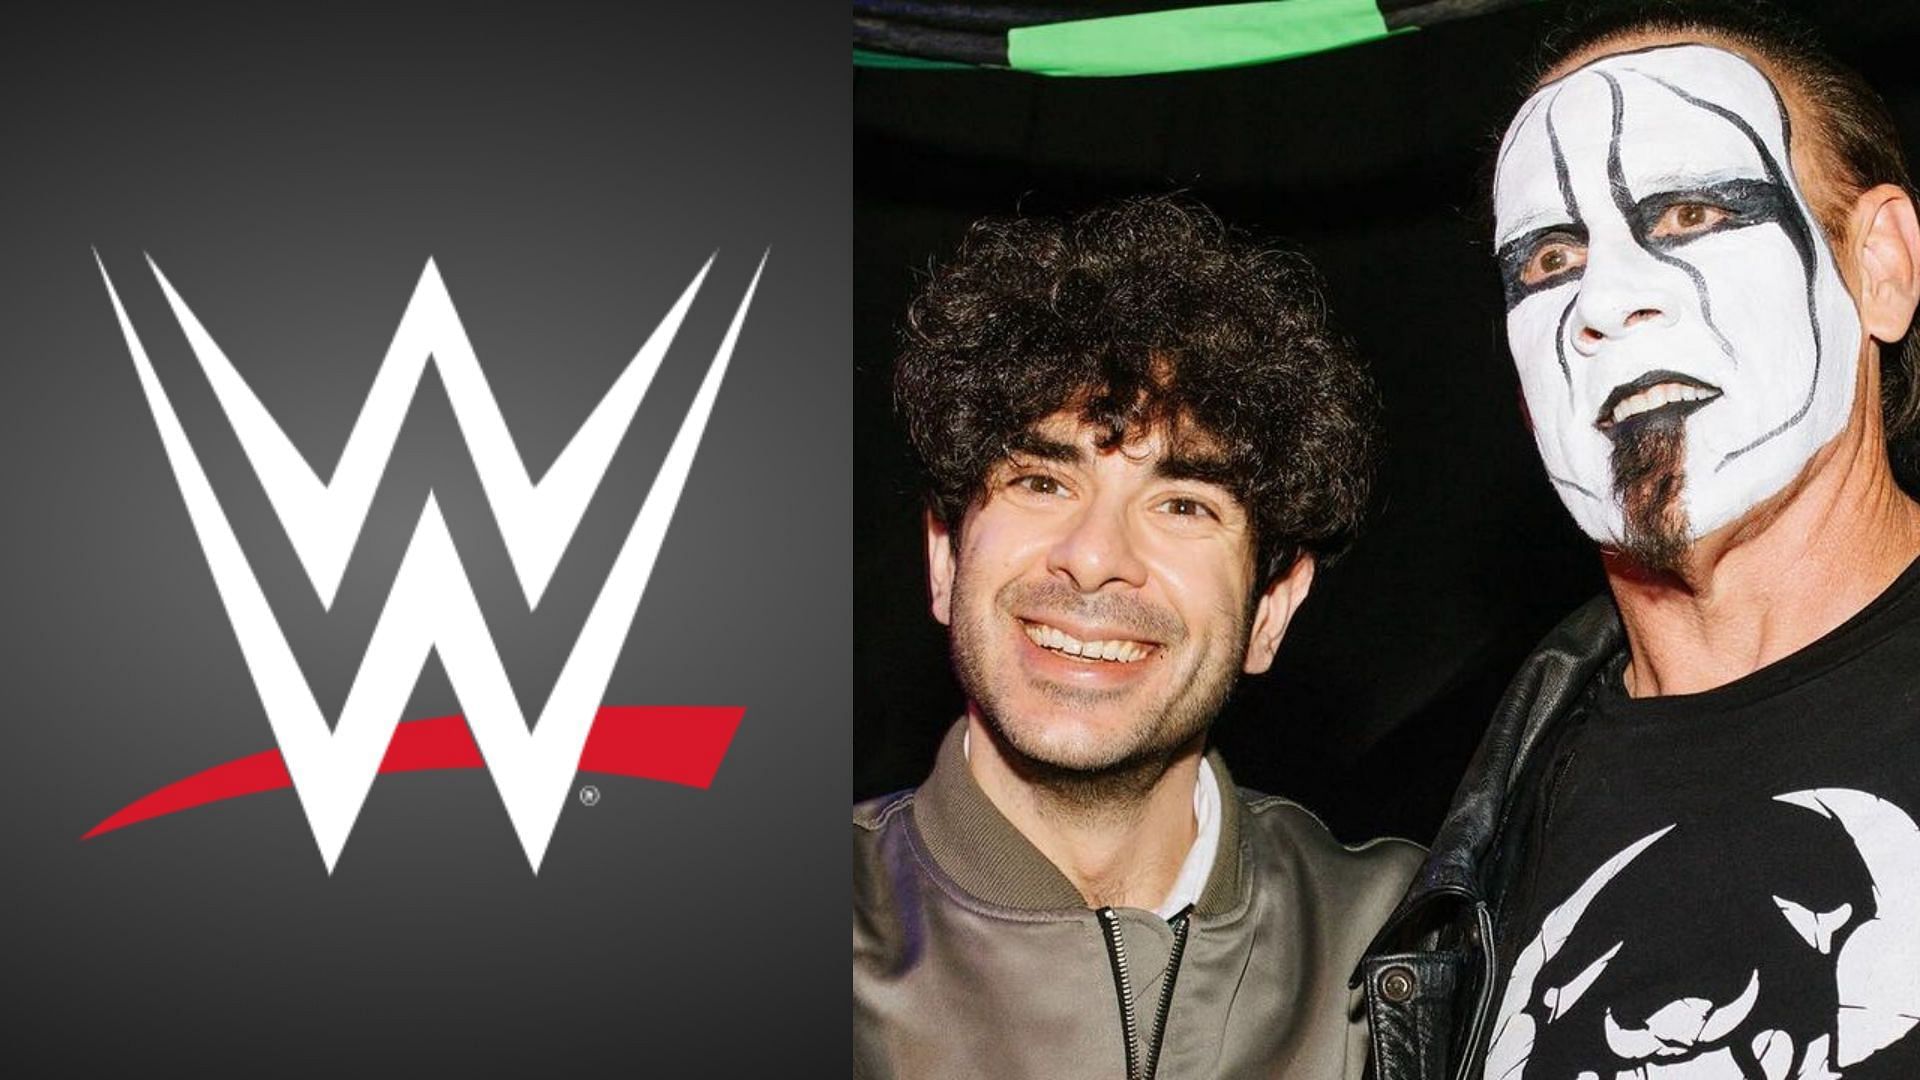 Tony Khan is the CEO of AEW [Image Credits: Sting